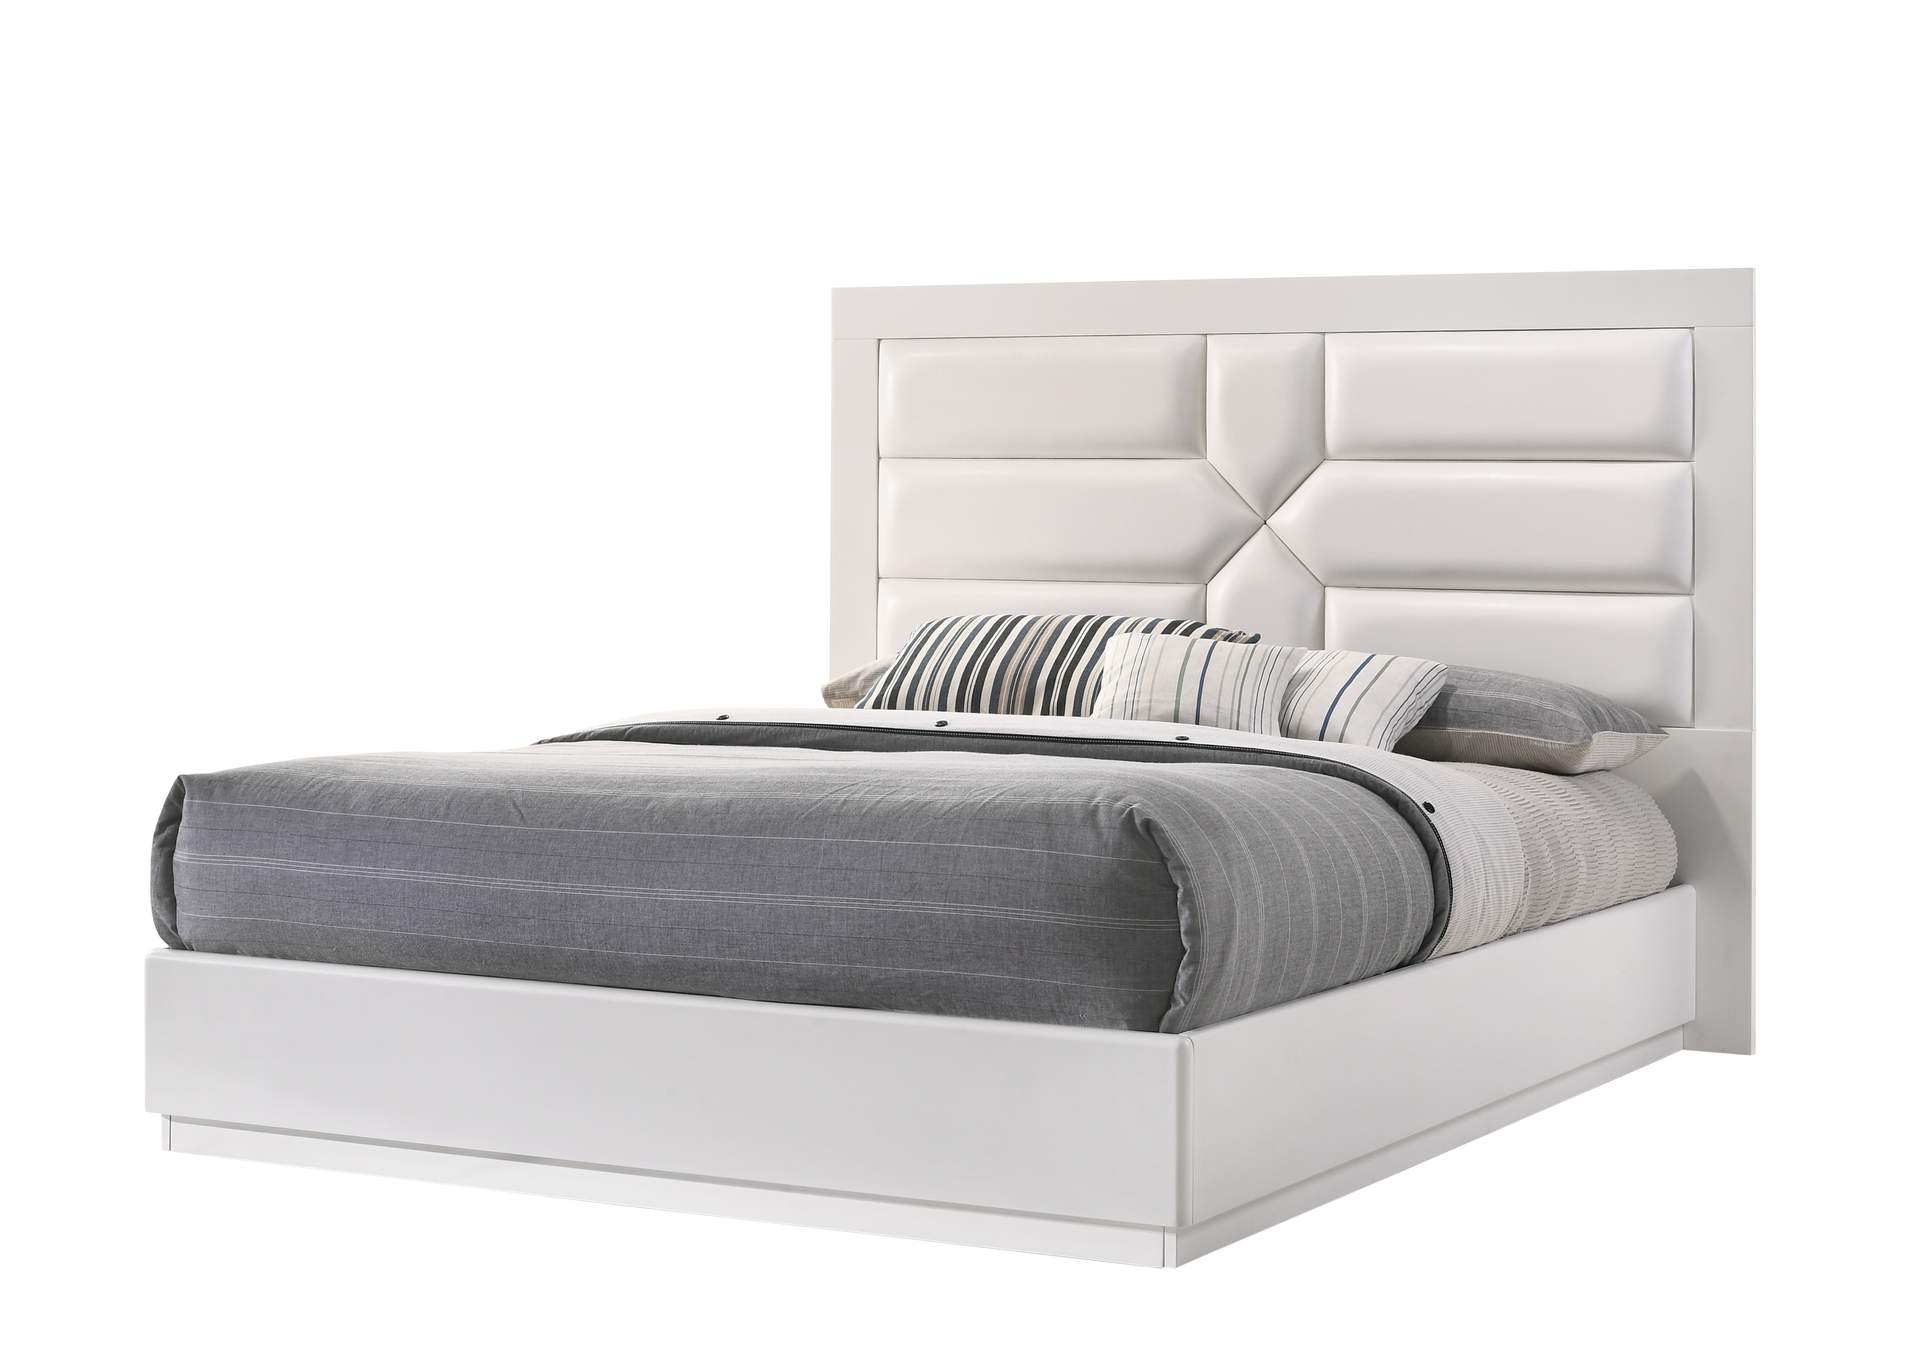 Contemporary Bedroom Set With Queen Size Bed,Chintaly Imports